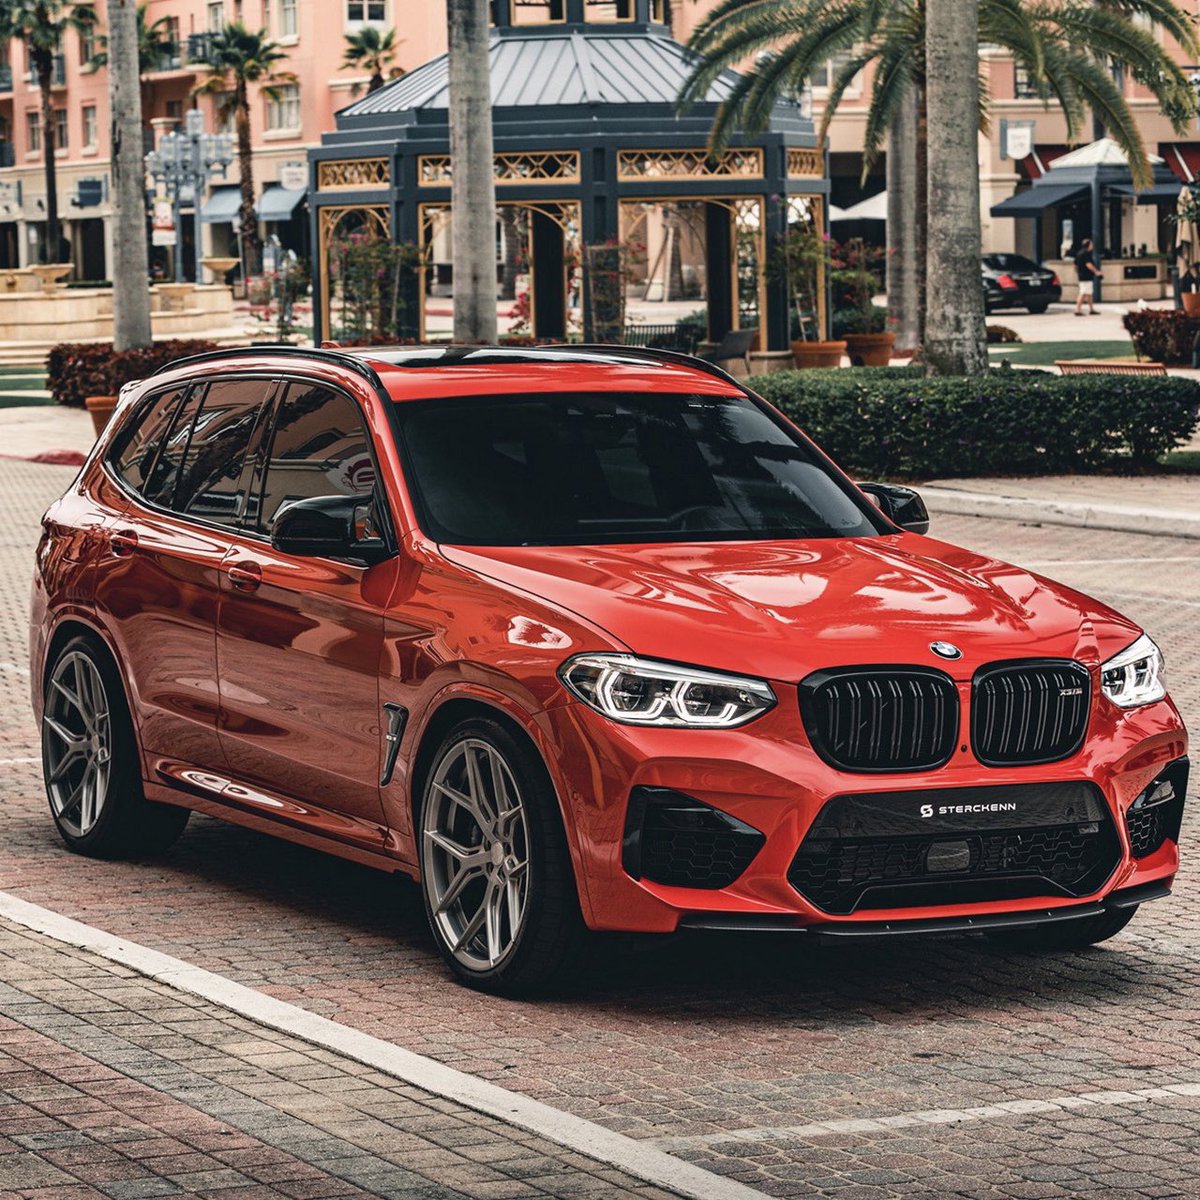 Twitter 上的MotorBeam："#BMW X3 M gets a sweet and subtle custom mod with new front carbon fibre splitter. Looks good in red n black, doesn't it? #MotorBeam https://t.co/Gxf7nbI6TN" / Twitter